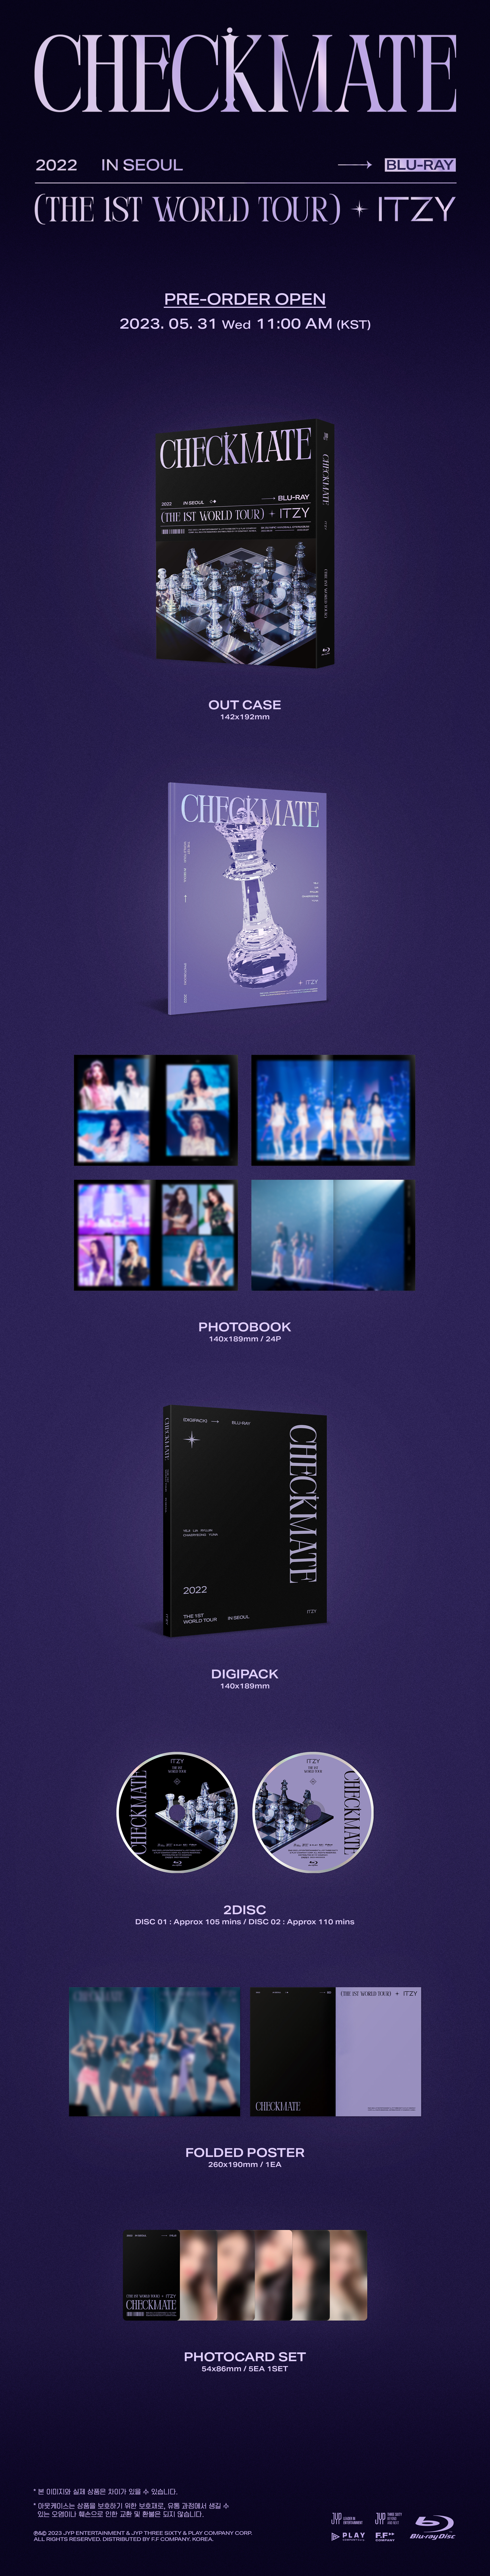 2022 ITZY THE 1ST WORLD TOUR (CHECKMATE) in SEOUL Blu-ray - JYP SHOP